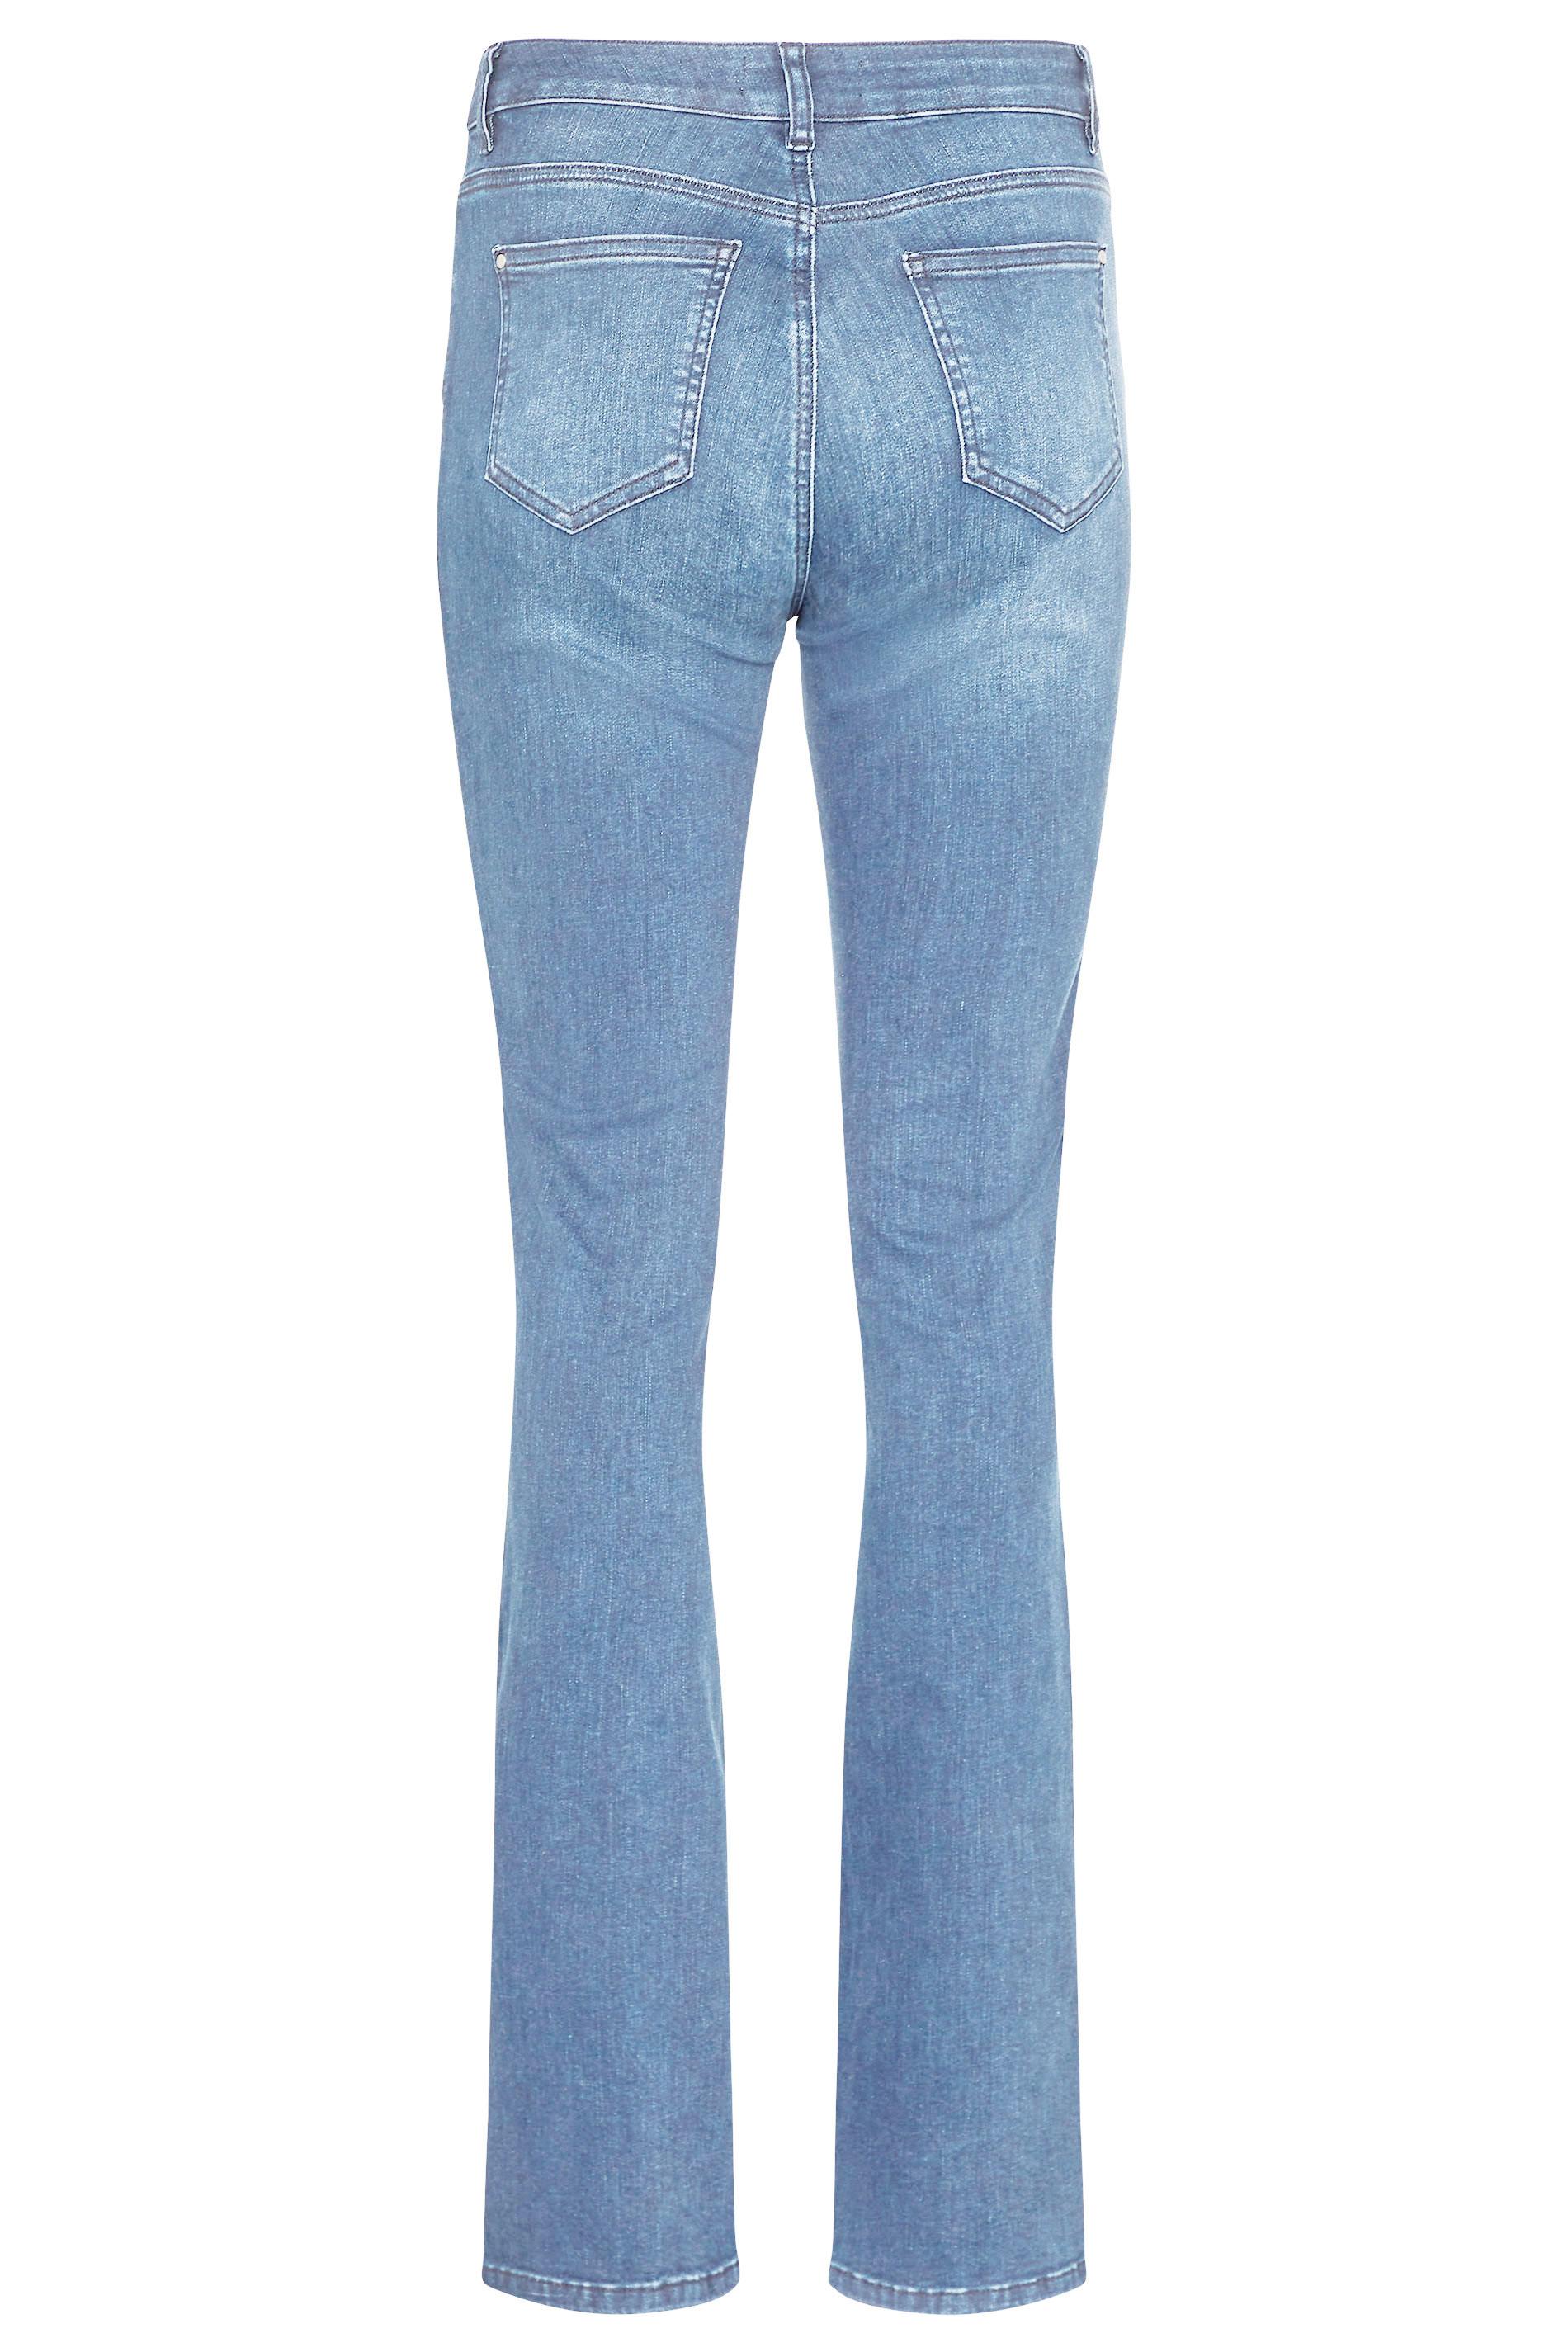 LTS MADE FOR GOOD Pacific Blue Straight Leg Jeans | Long Tall Sally